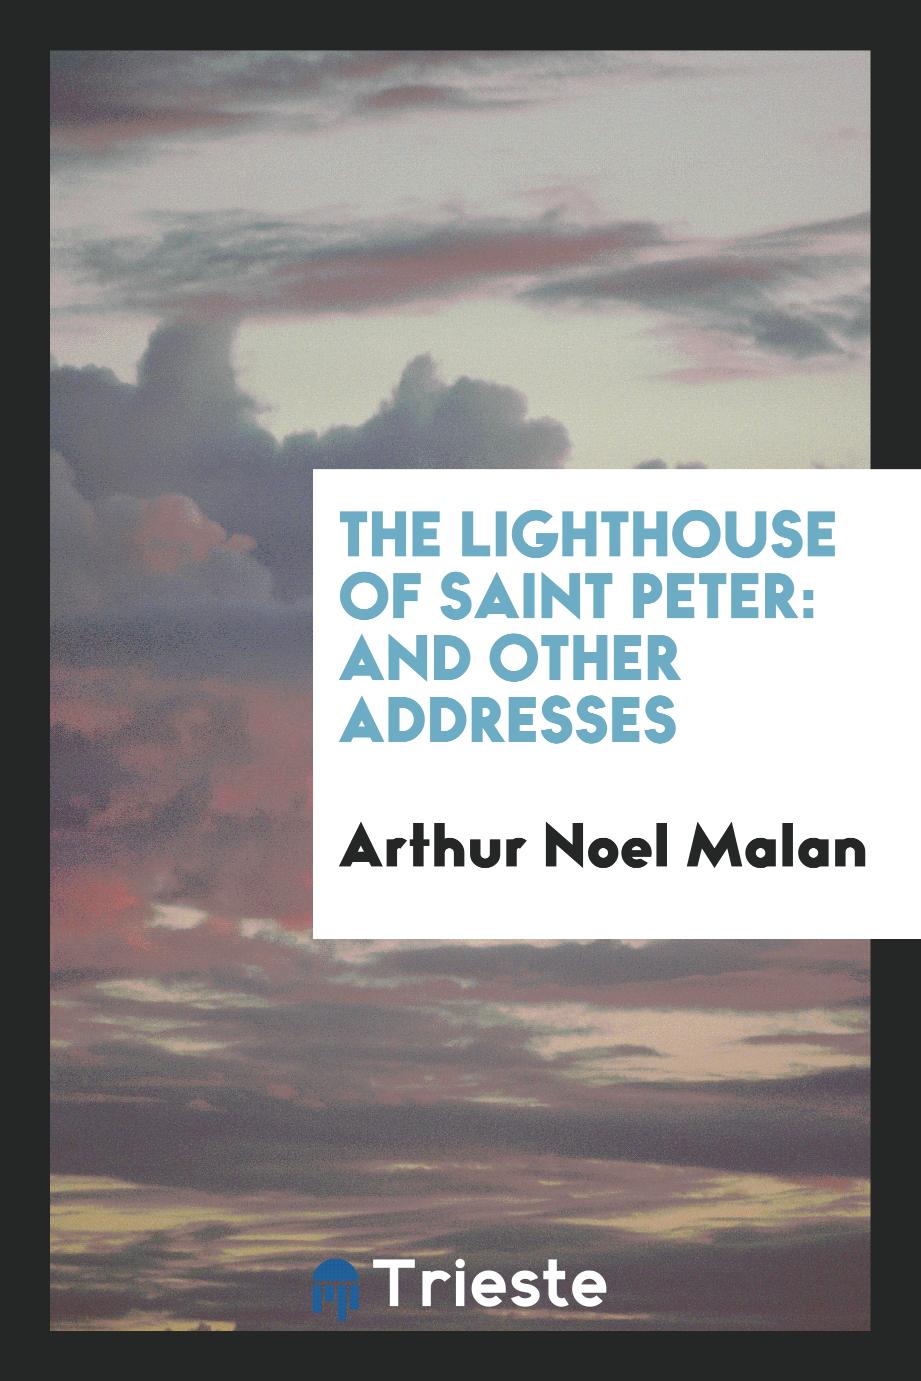 The Lighthouse of Saint Peter: And Other Addresses